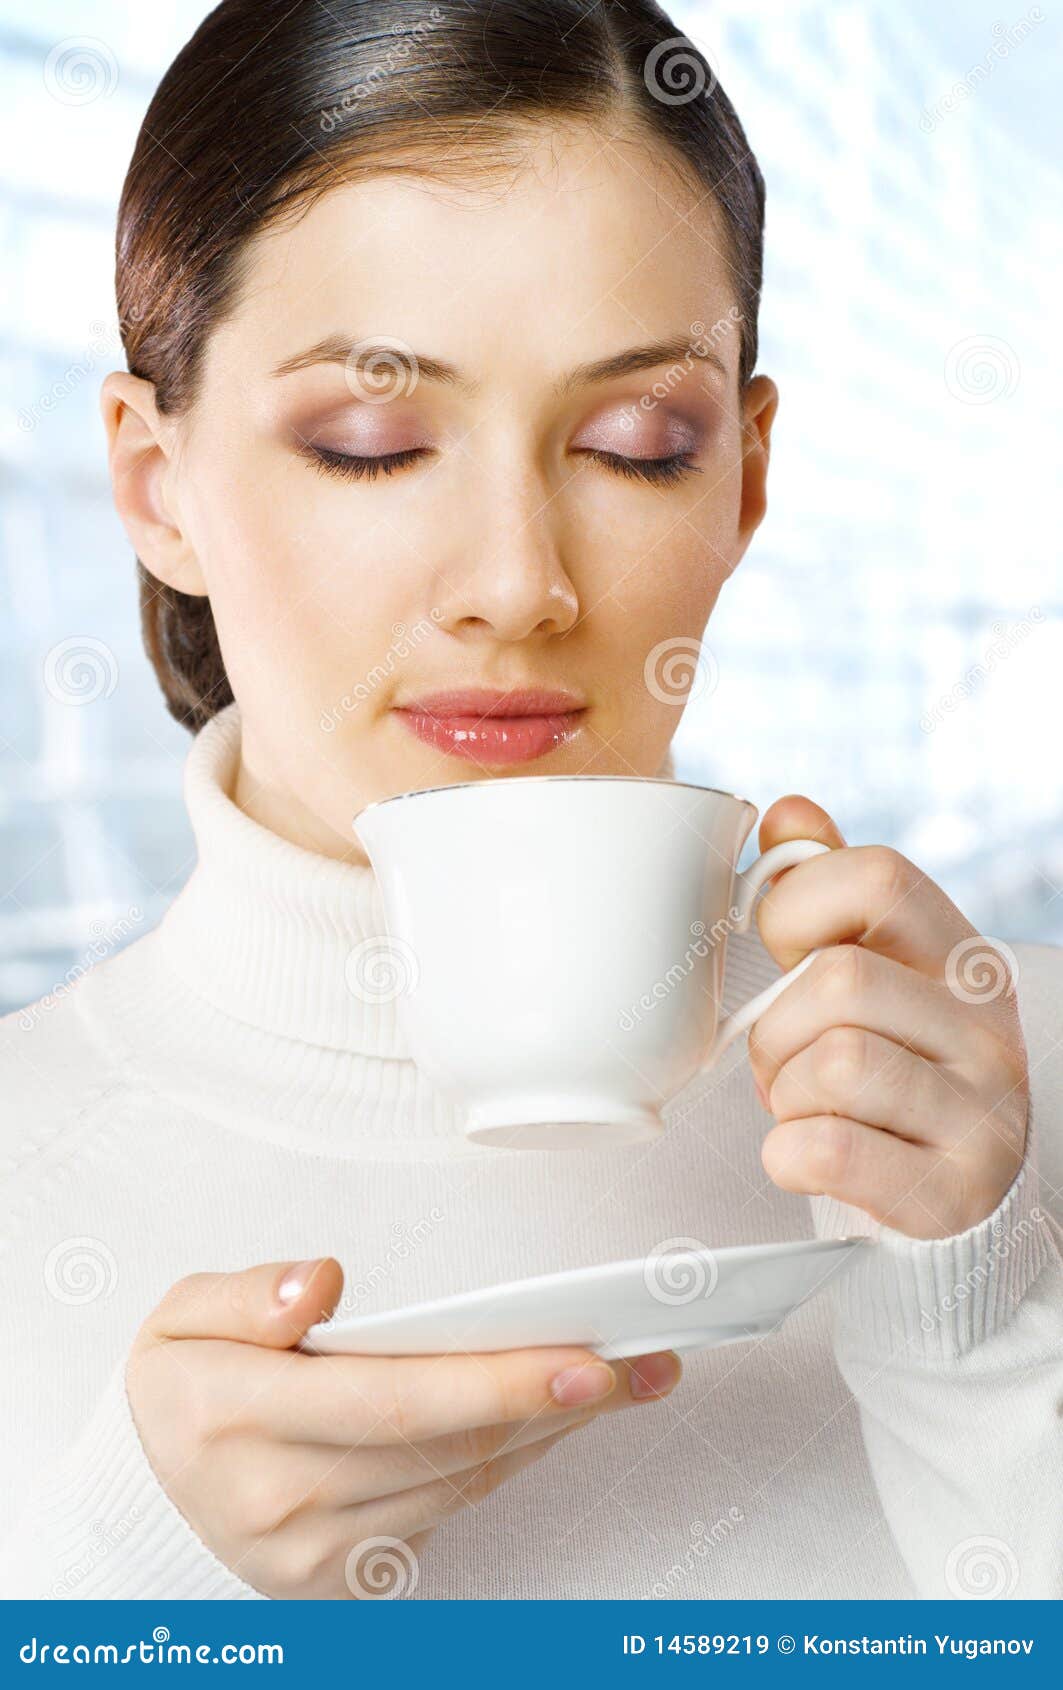 Aromatic coffee stock image. Image of face, refreshment - 14589219